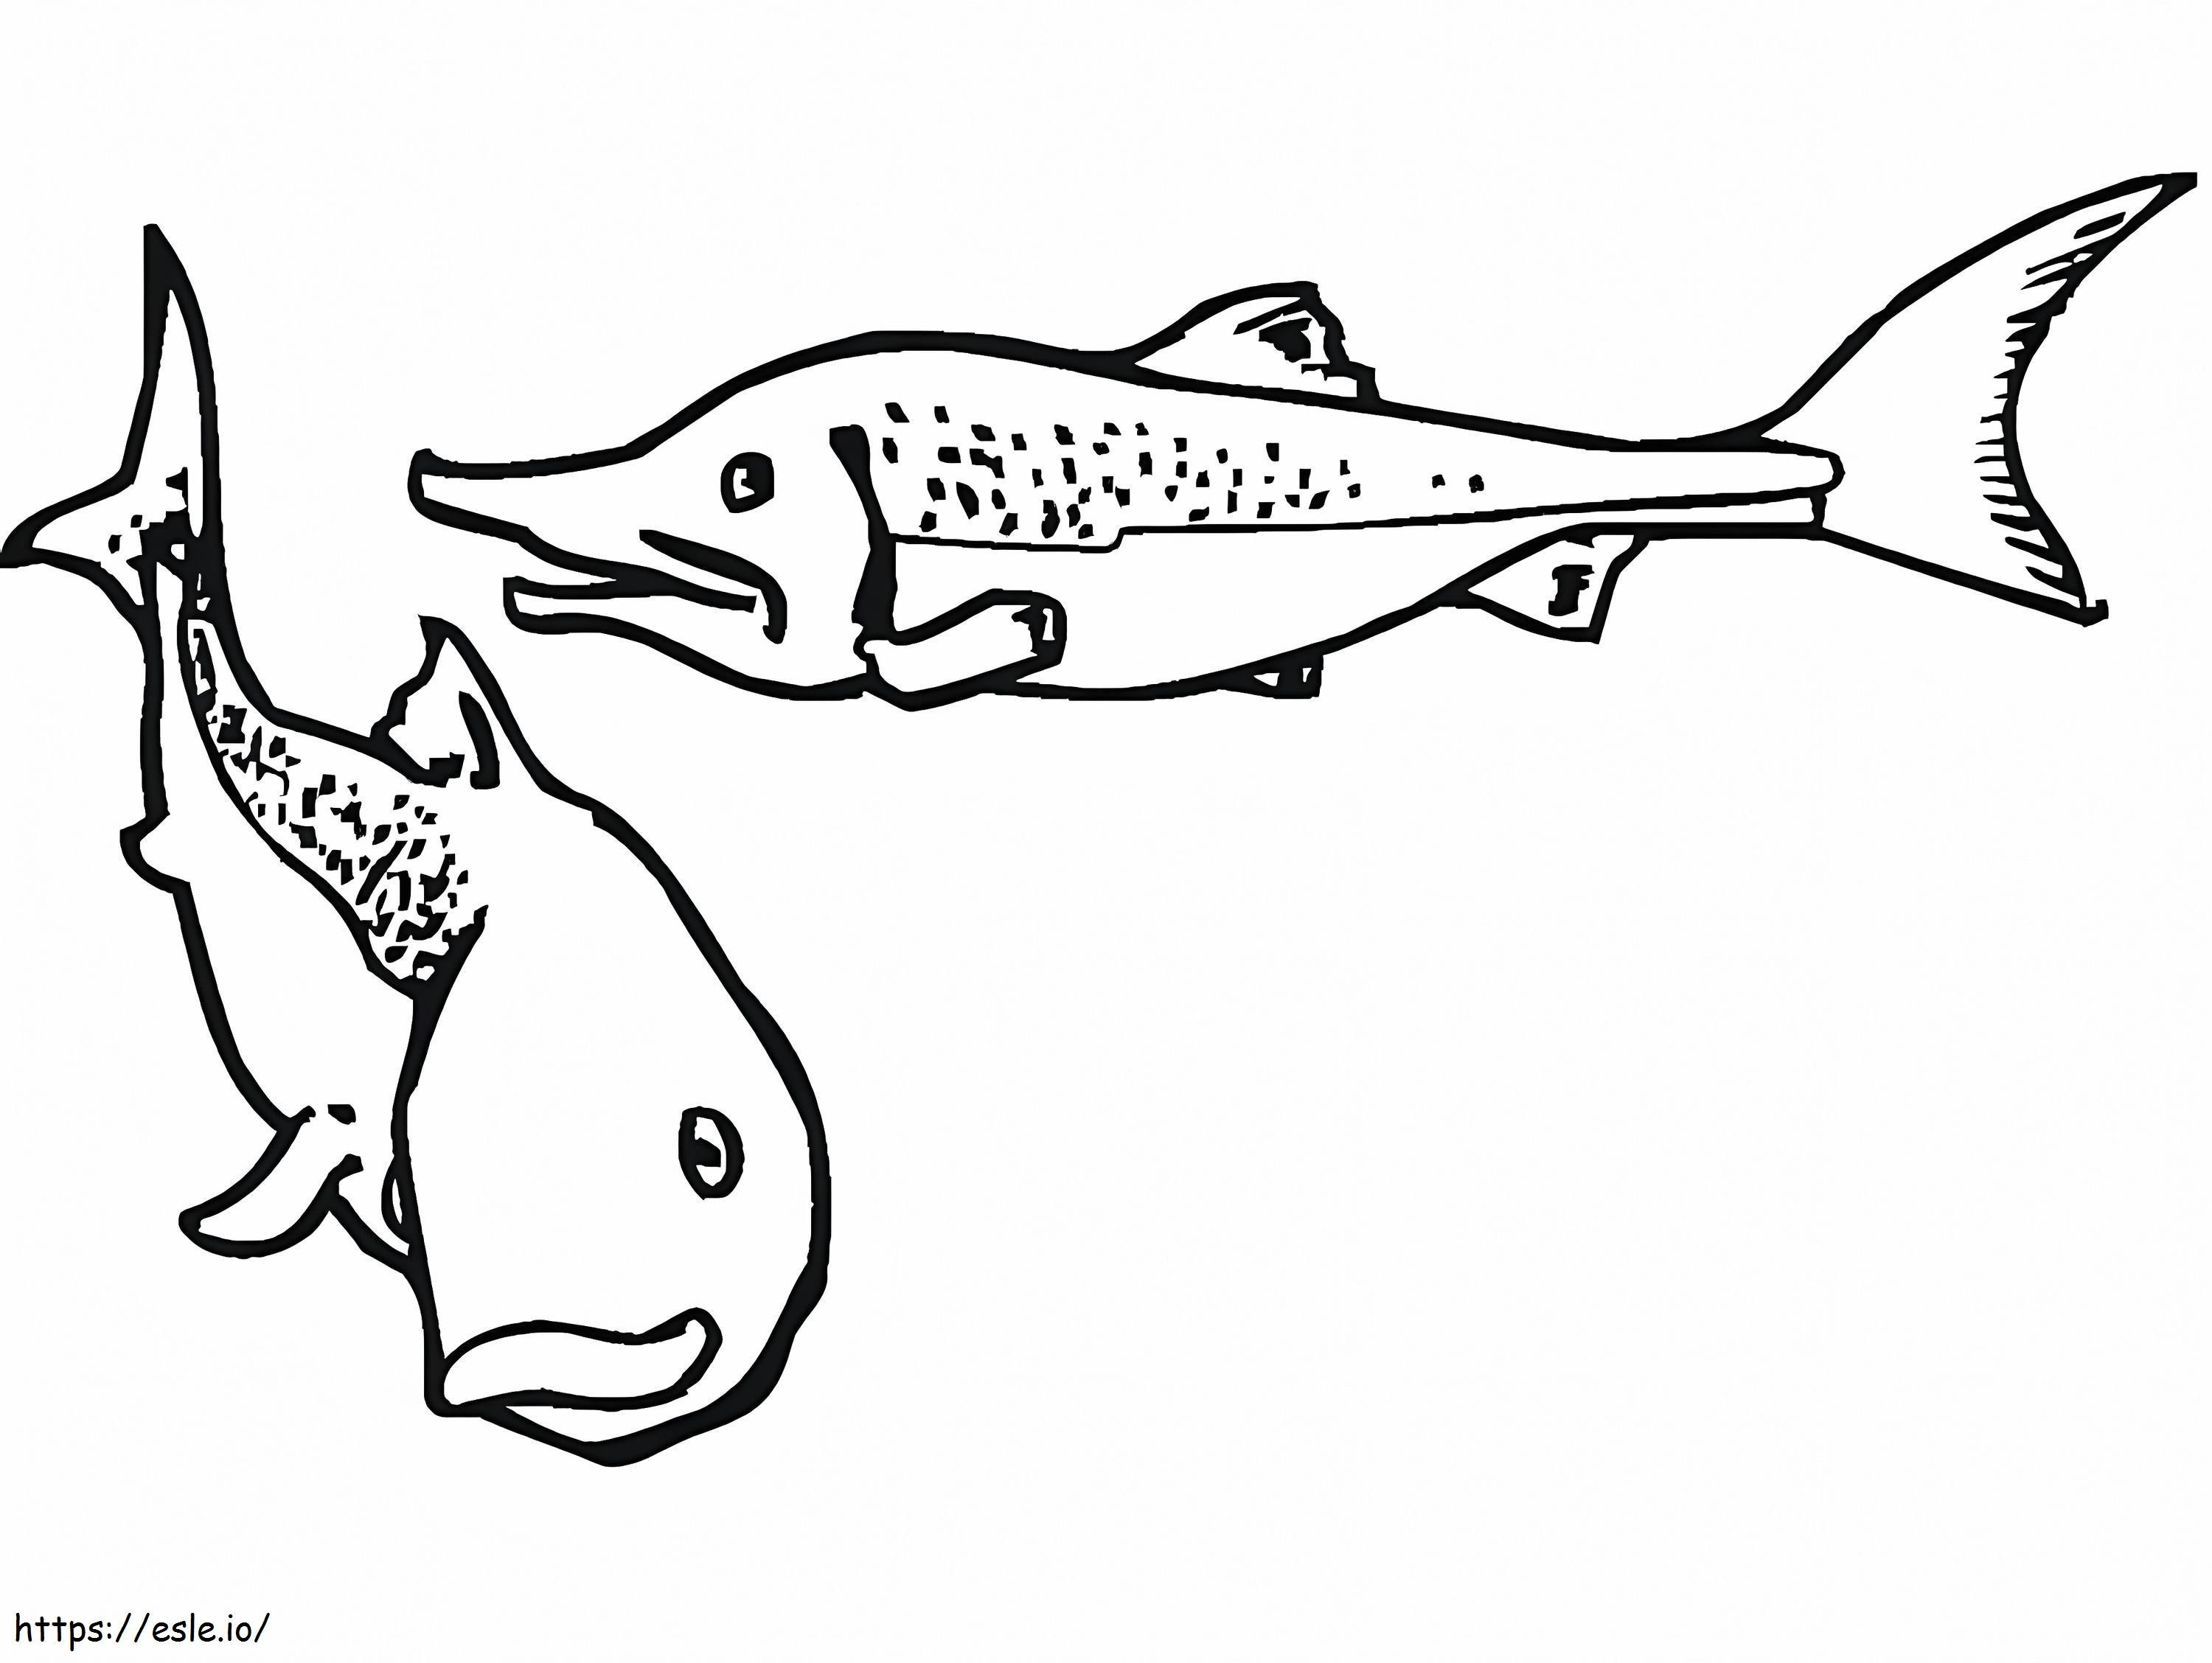 Two Salmons coloring page